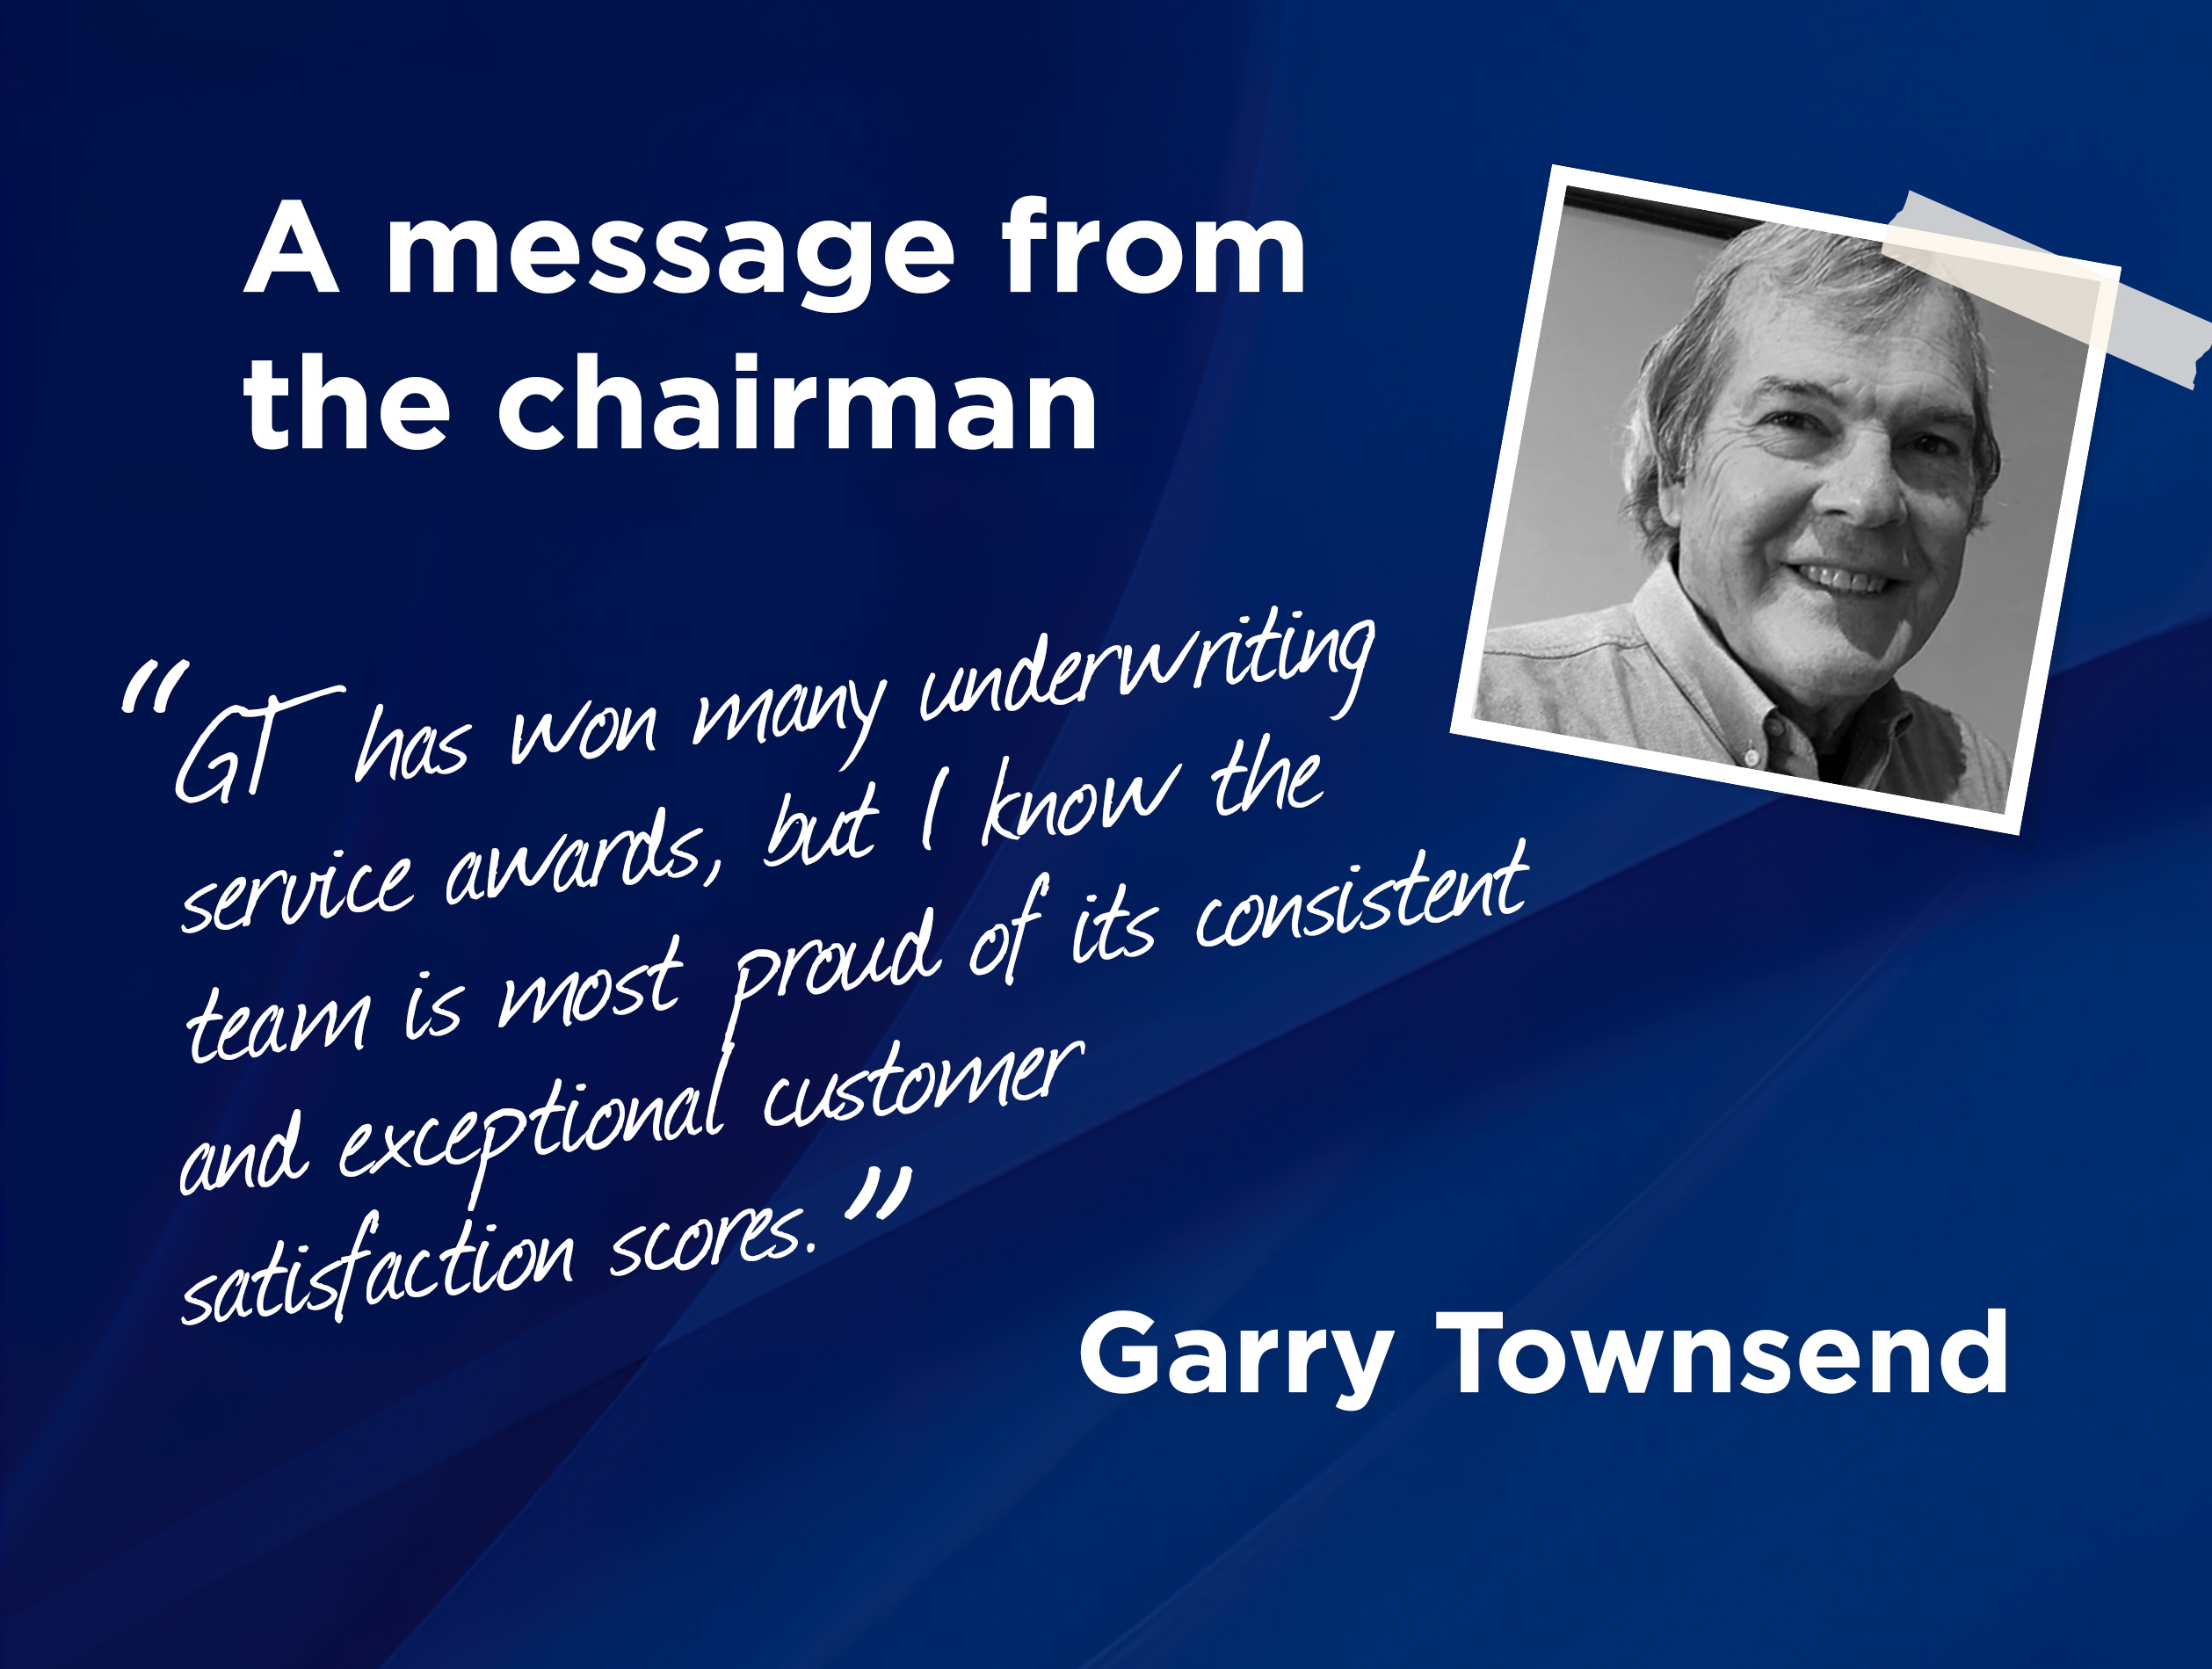 A message from chairman, Garry Townsend who served for GT Insurance for over 20 years